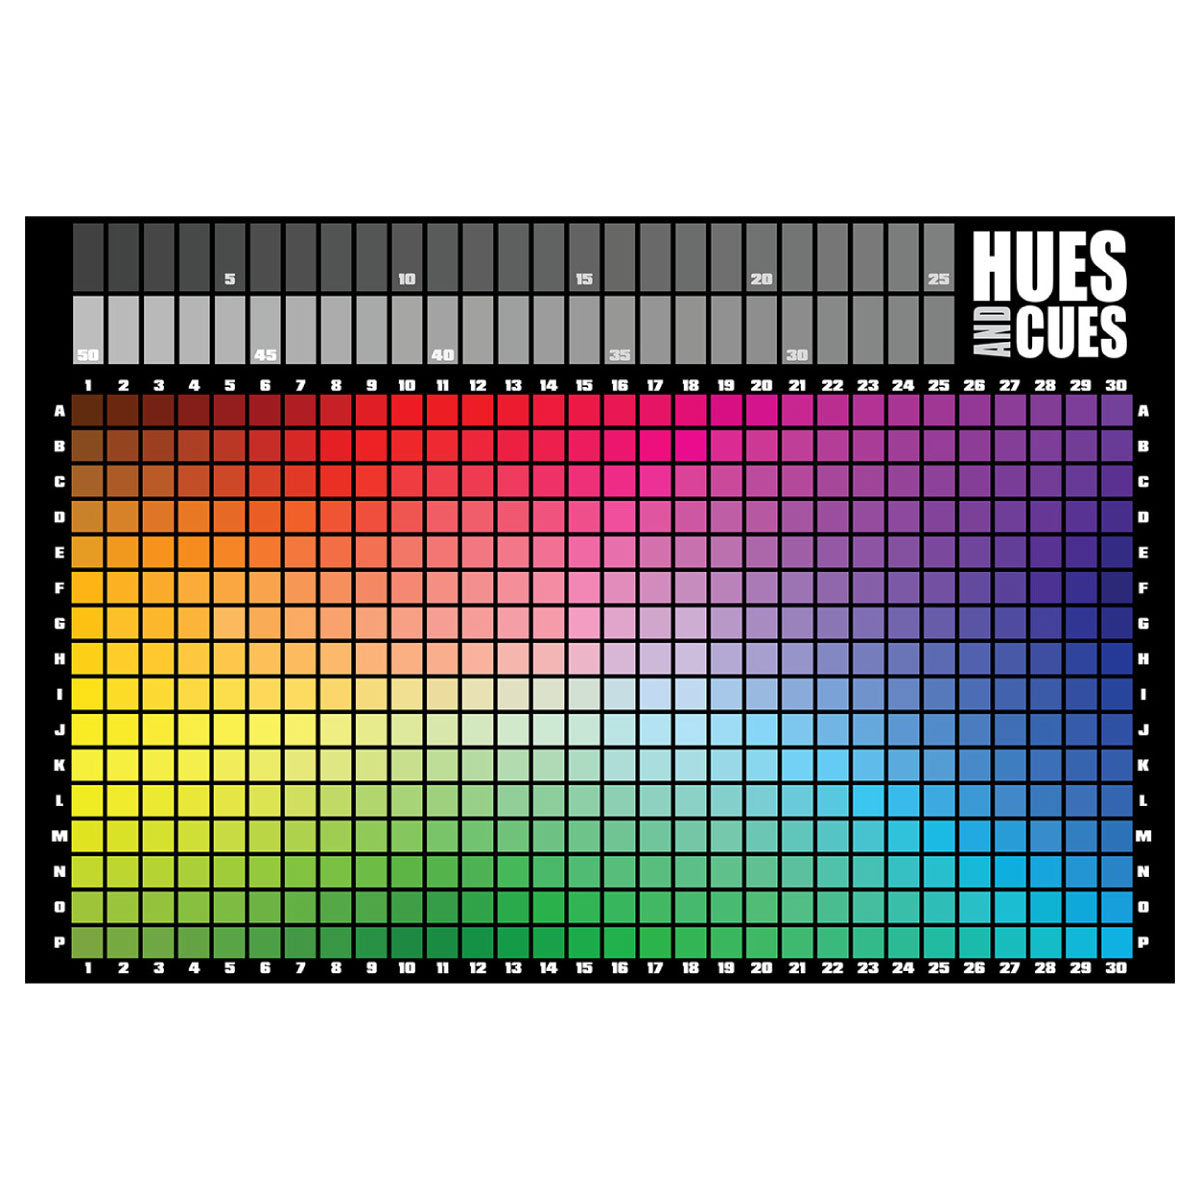 Hues and Cues from USAOpoly